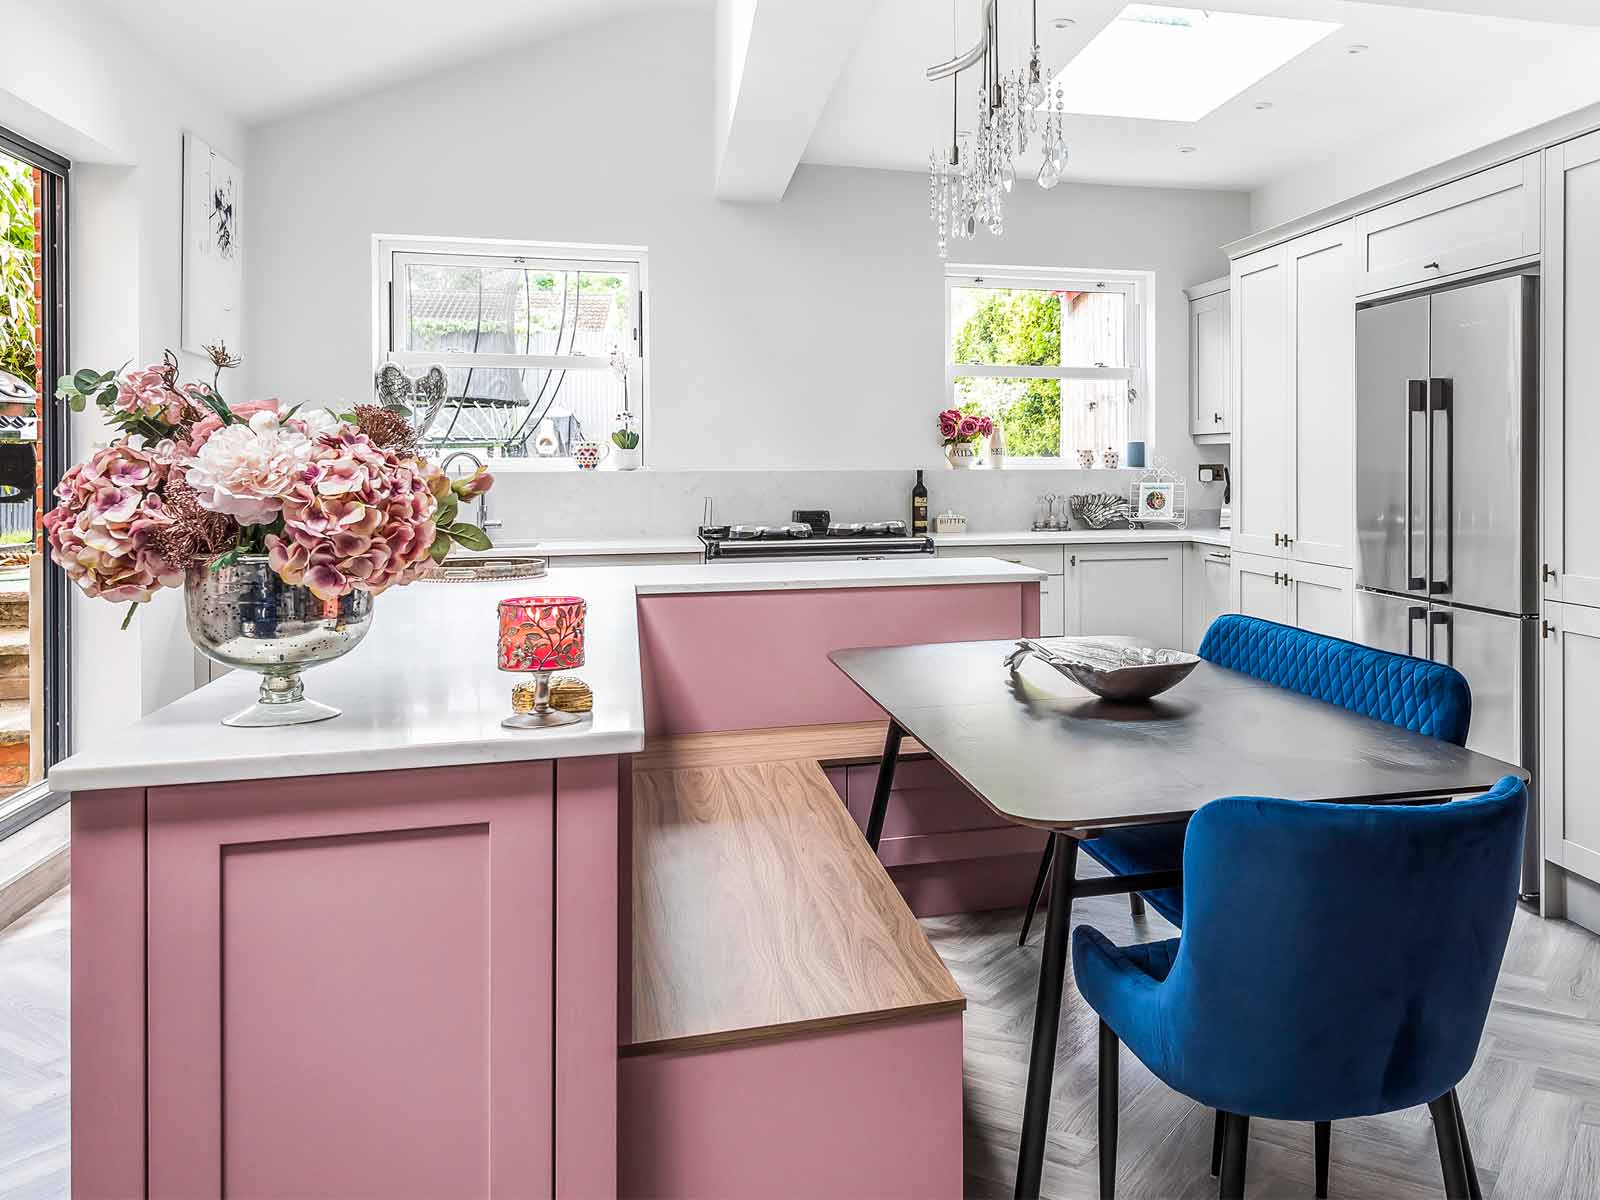 Floral kitsch kitchen decorations atop a pink and blue kitchen dining set-up